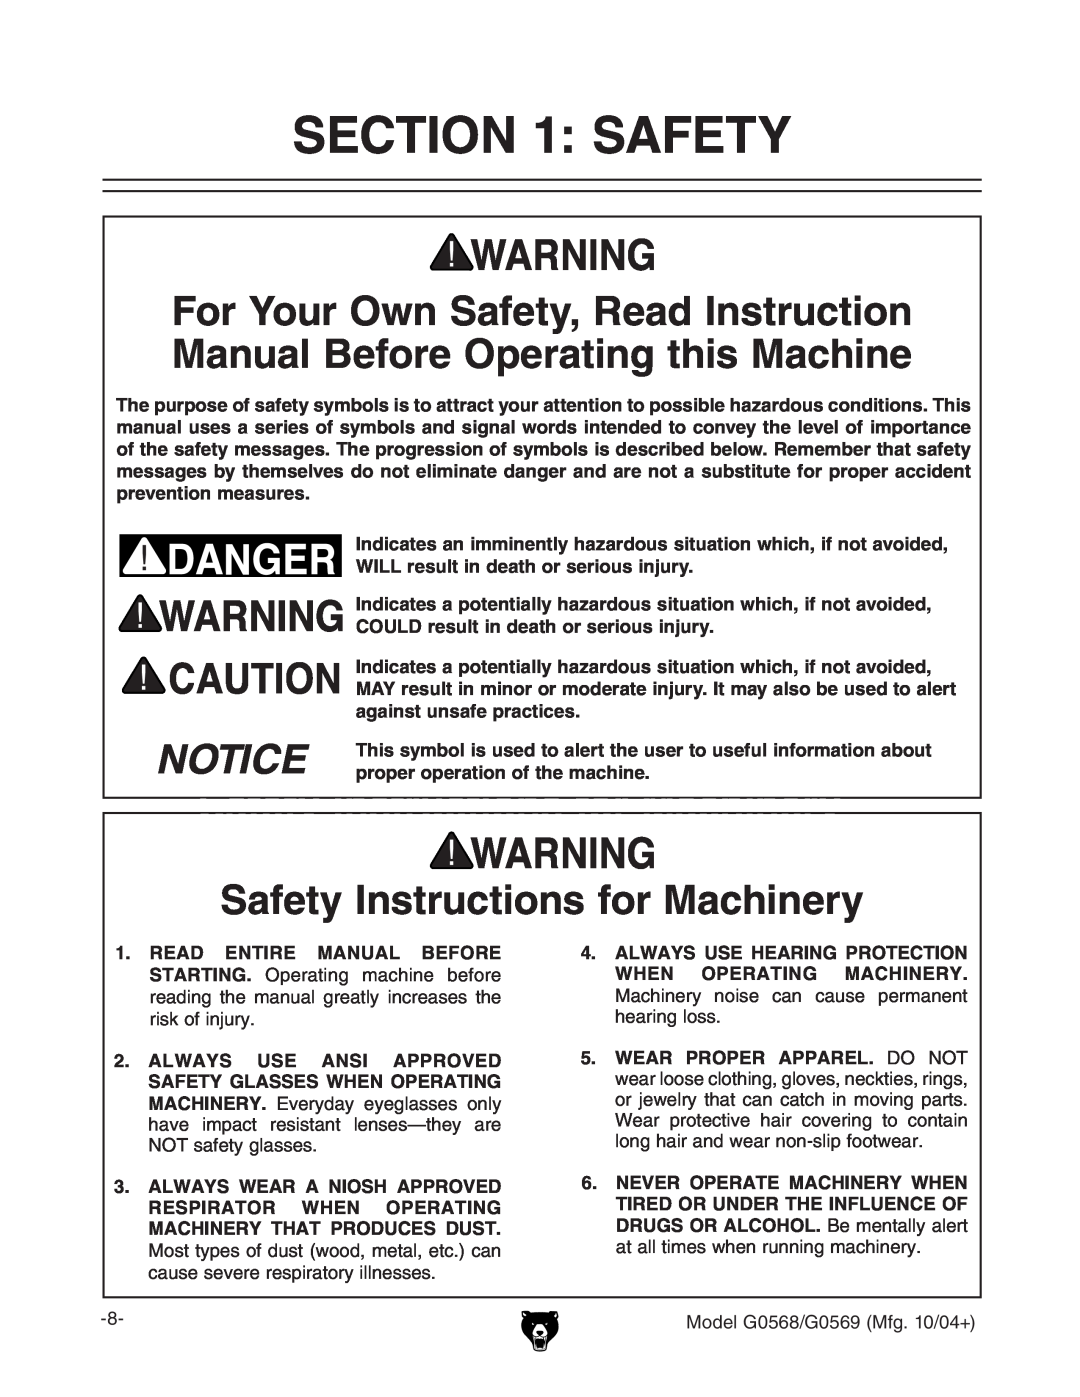 Grizzly G0569 Safety Instructions for Machinery, WILL result in death or serious injury, against unsafe practices 